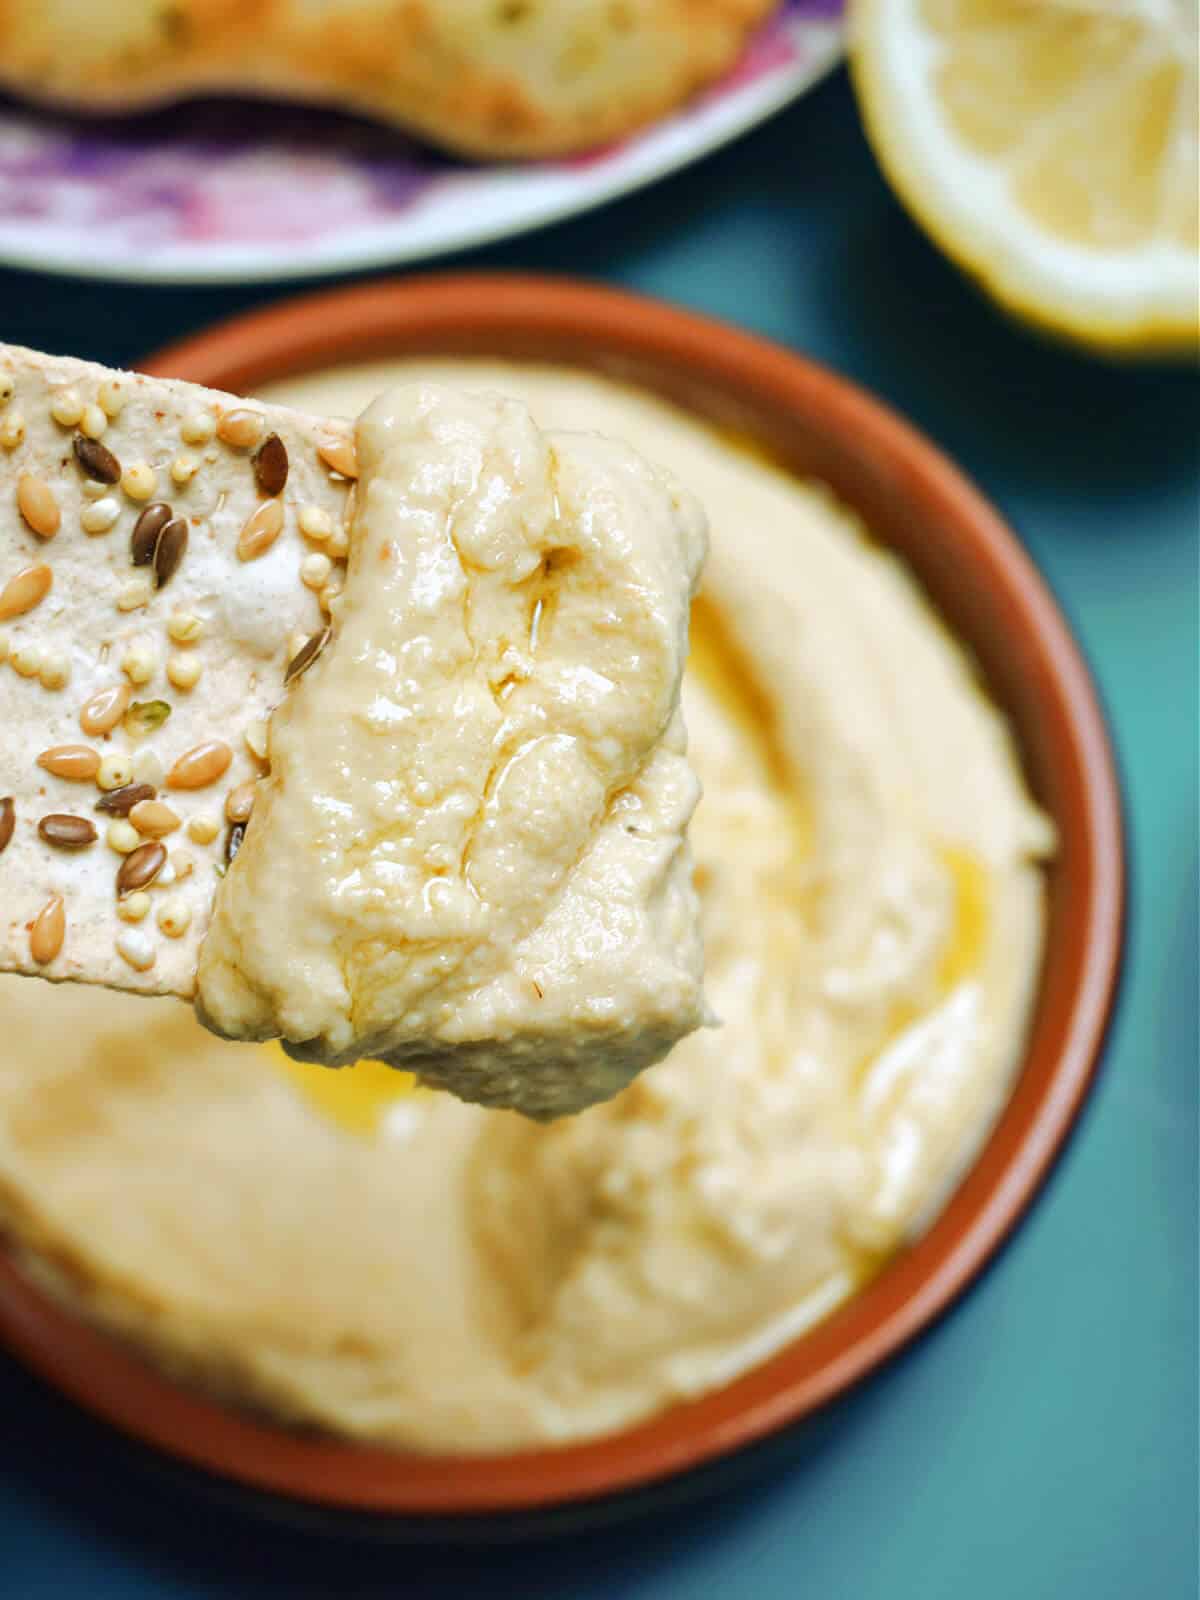 A flatbread dipped into hummus.